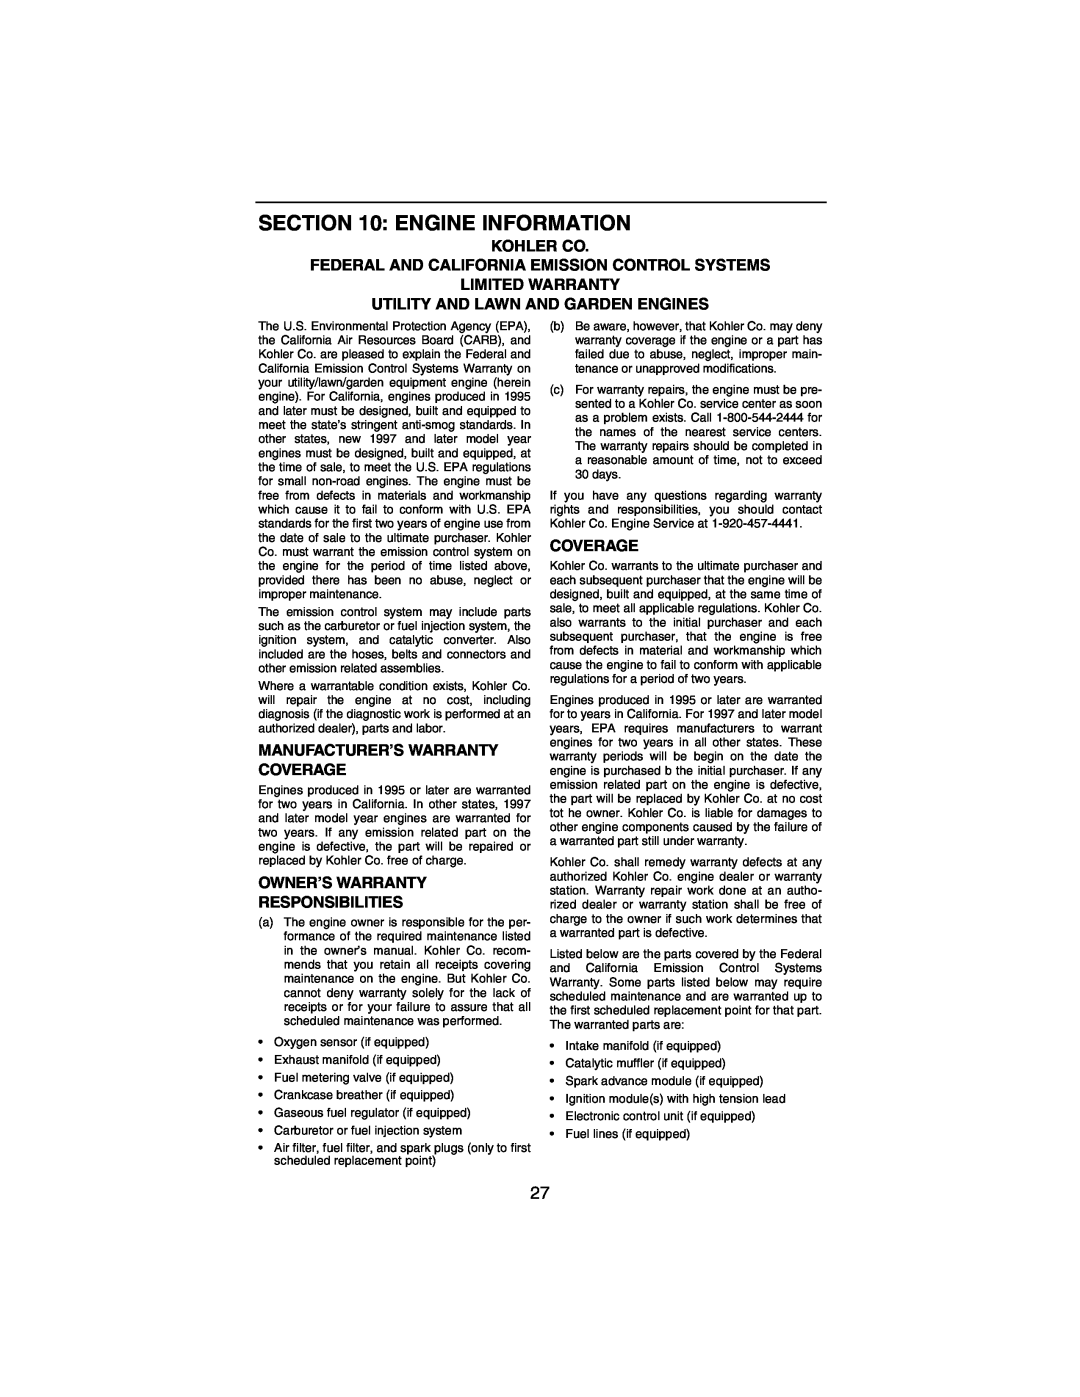 Cub Cadet 3184 manual Engine Information, Kohler Co Federal And California Emission Control Systems, Coverage 